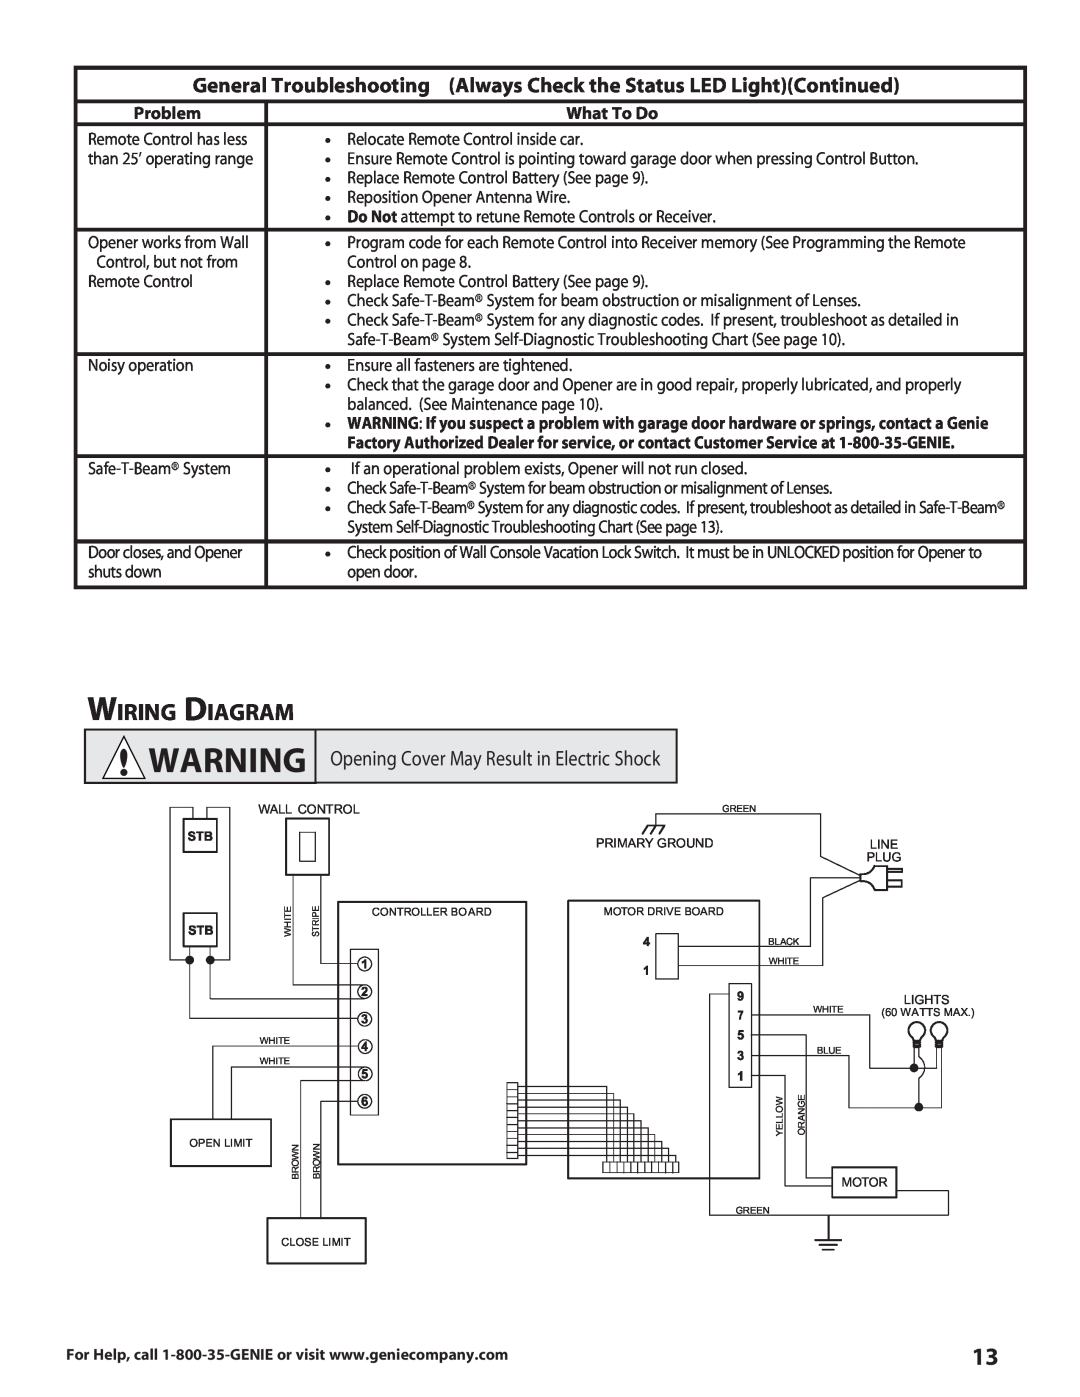 Genie 3627336241 warranty Wiring Diagram, Opening Cover May Result in Electric Shock 